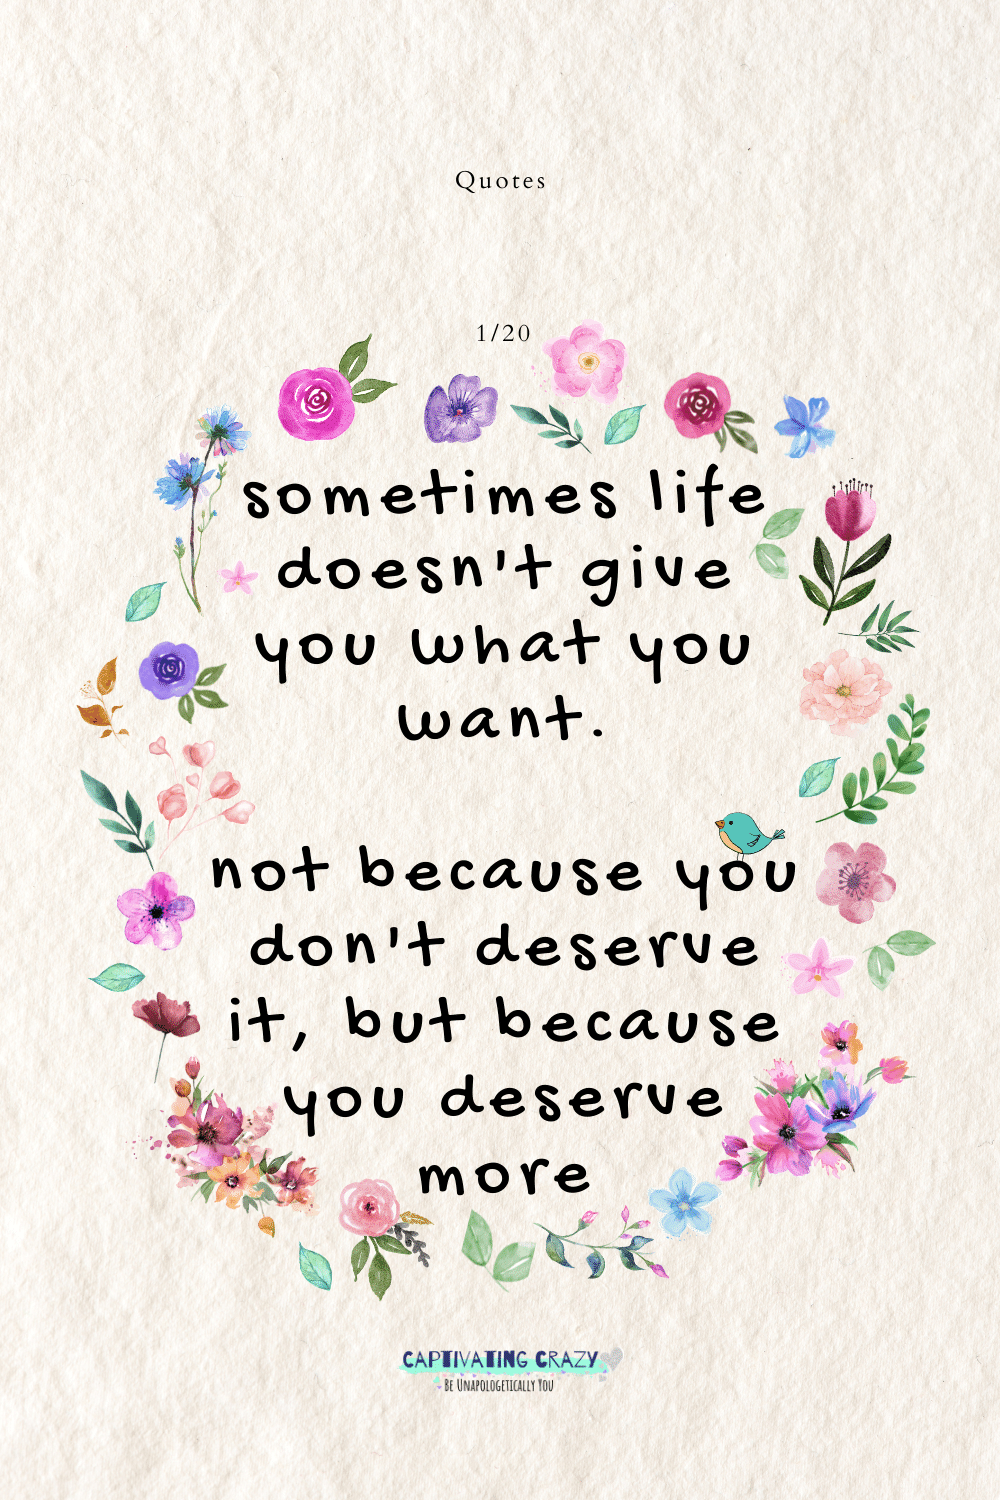 Sometimes life doesn't give you what you want. Not because you don't deserve it, but because you deserve more